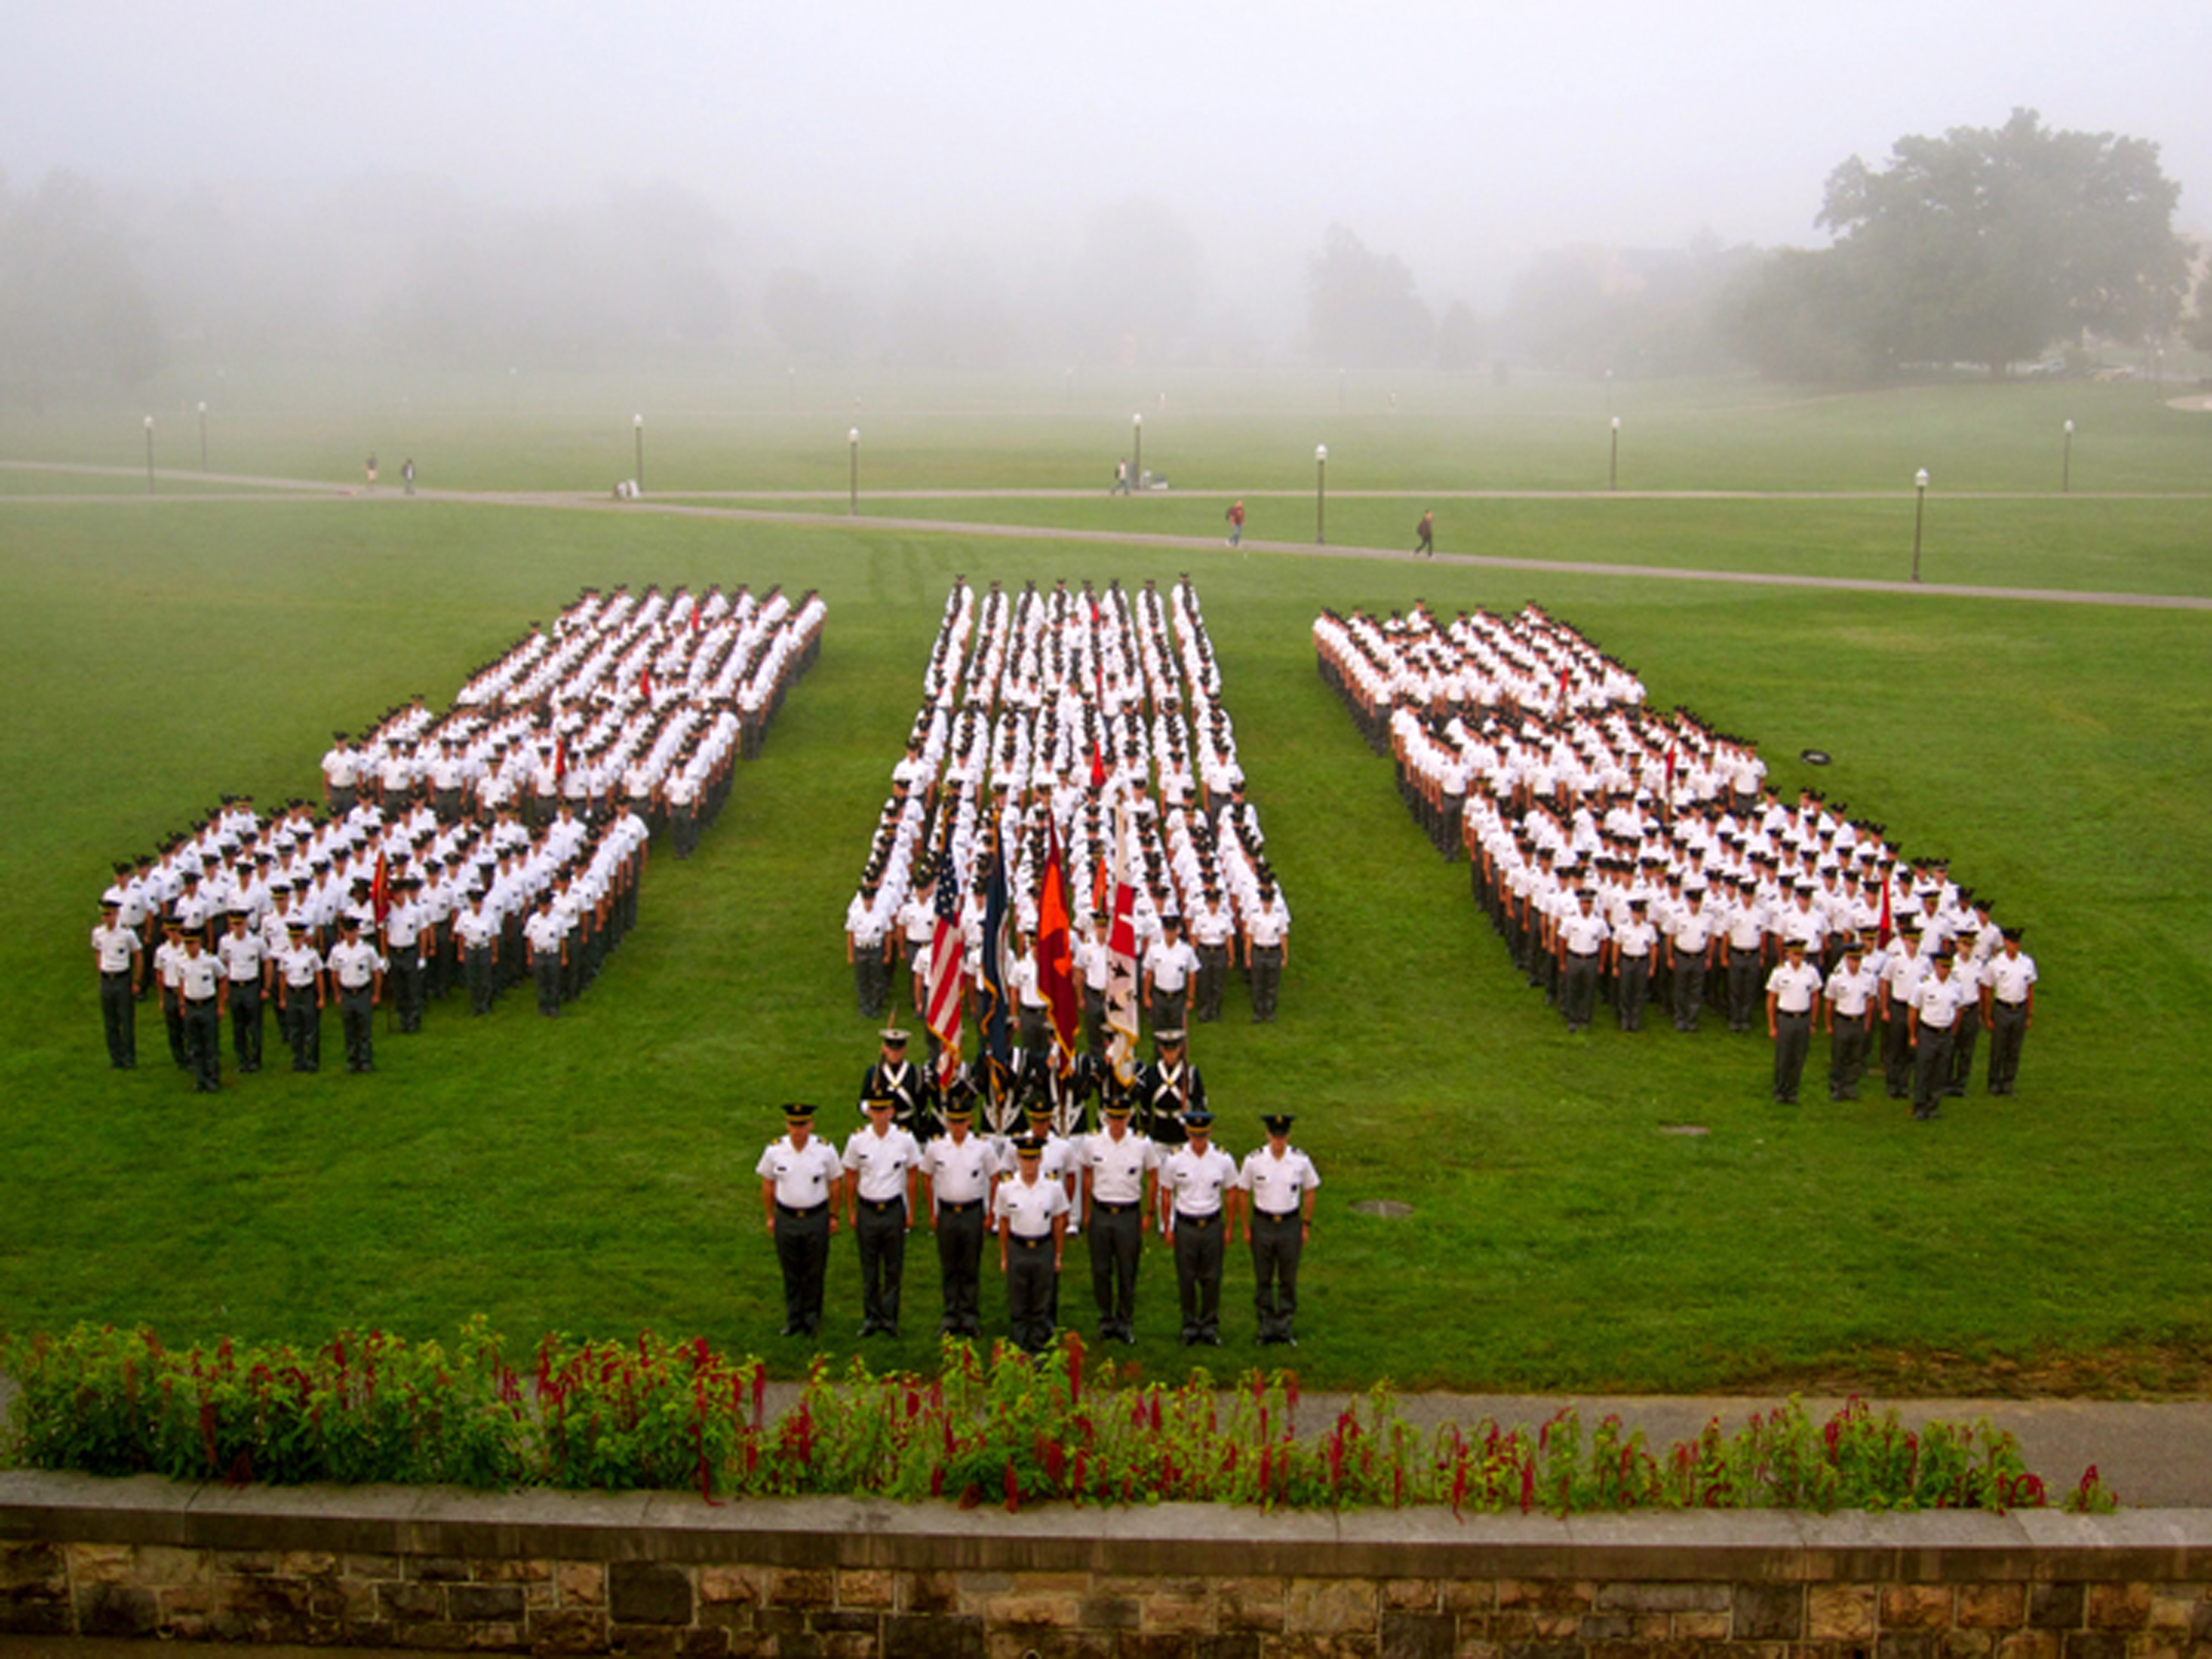 The Virginia Tech Corps of Cadets formed in front of the War Memorial Chapel in the fall of 2010